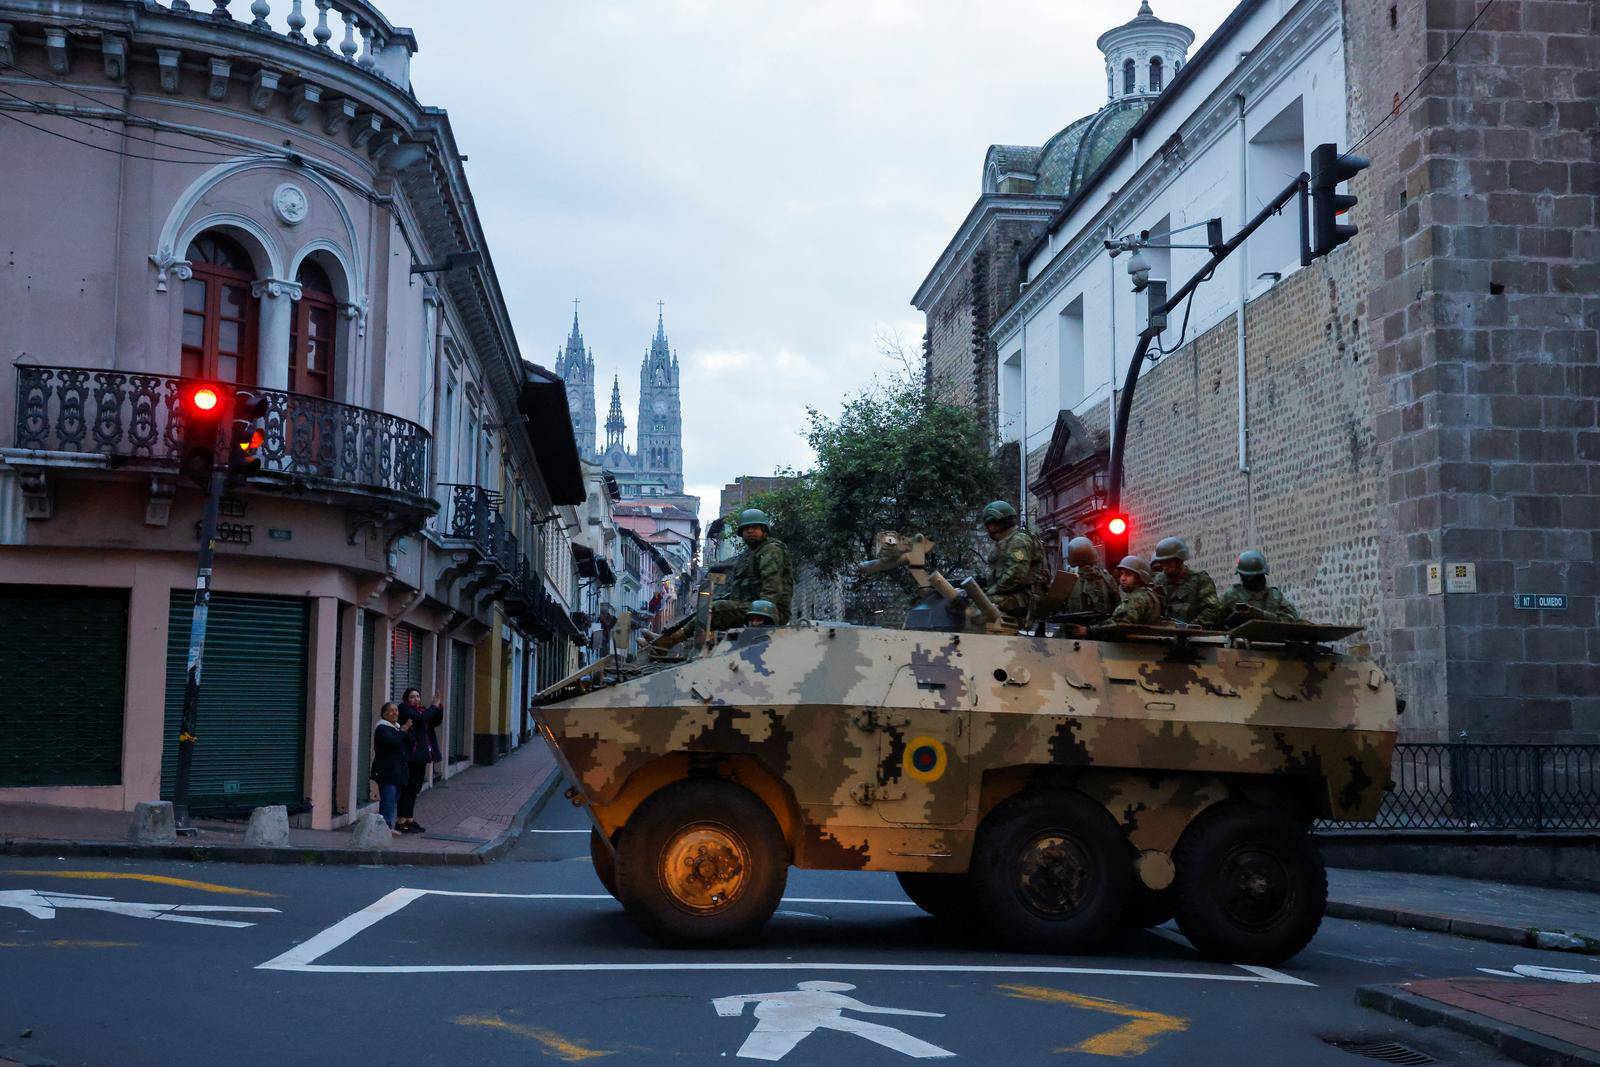 Security forces patrol after a violence outbreak, in Quito